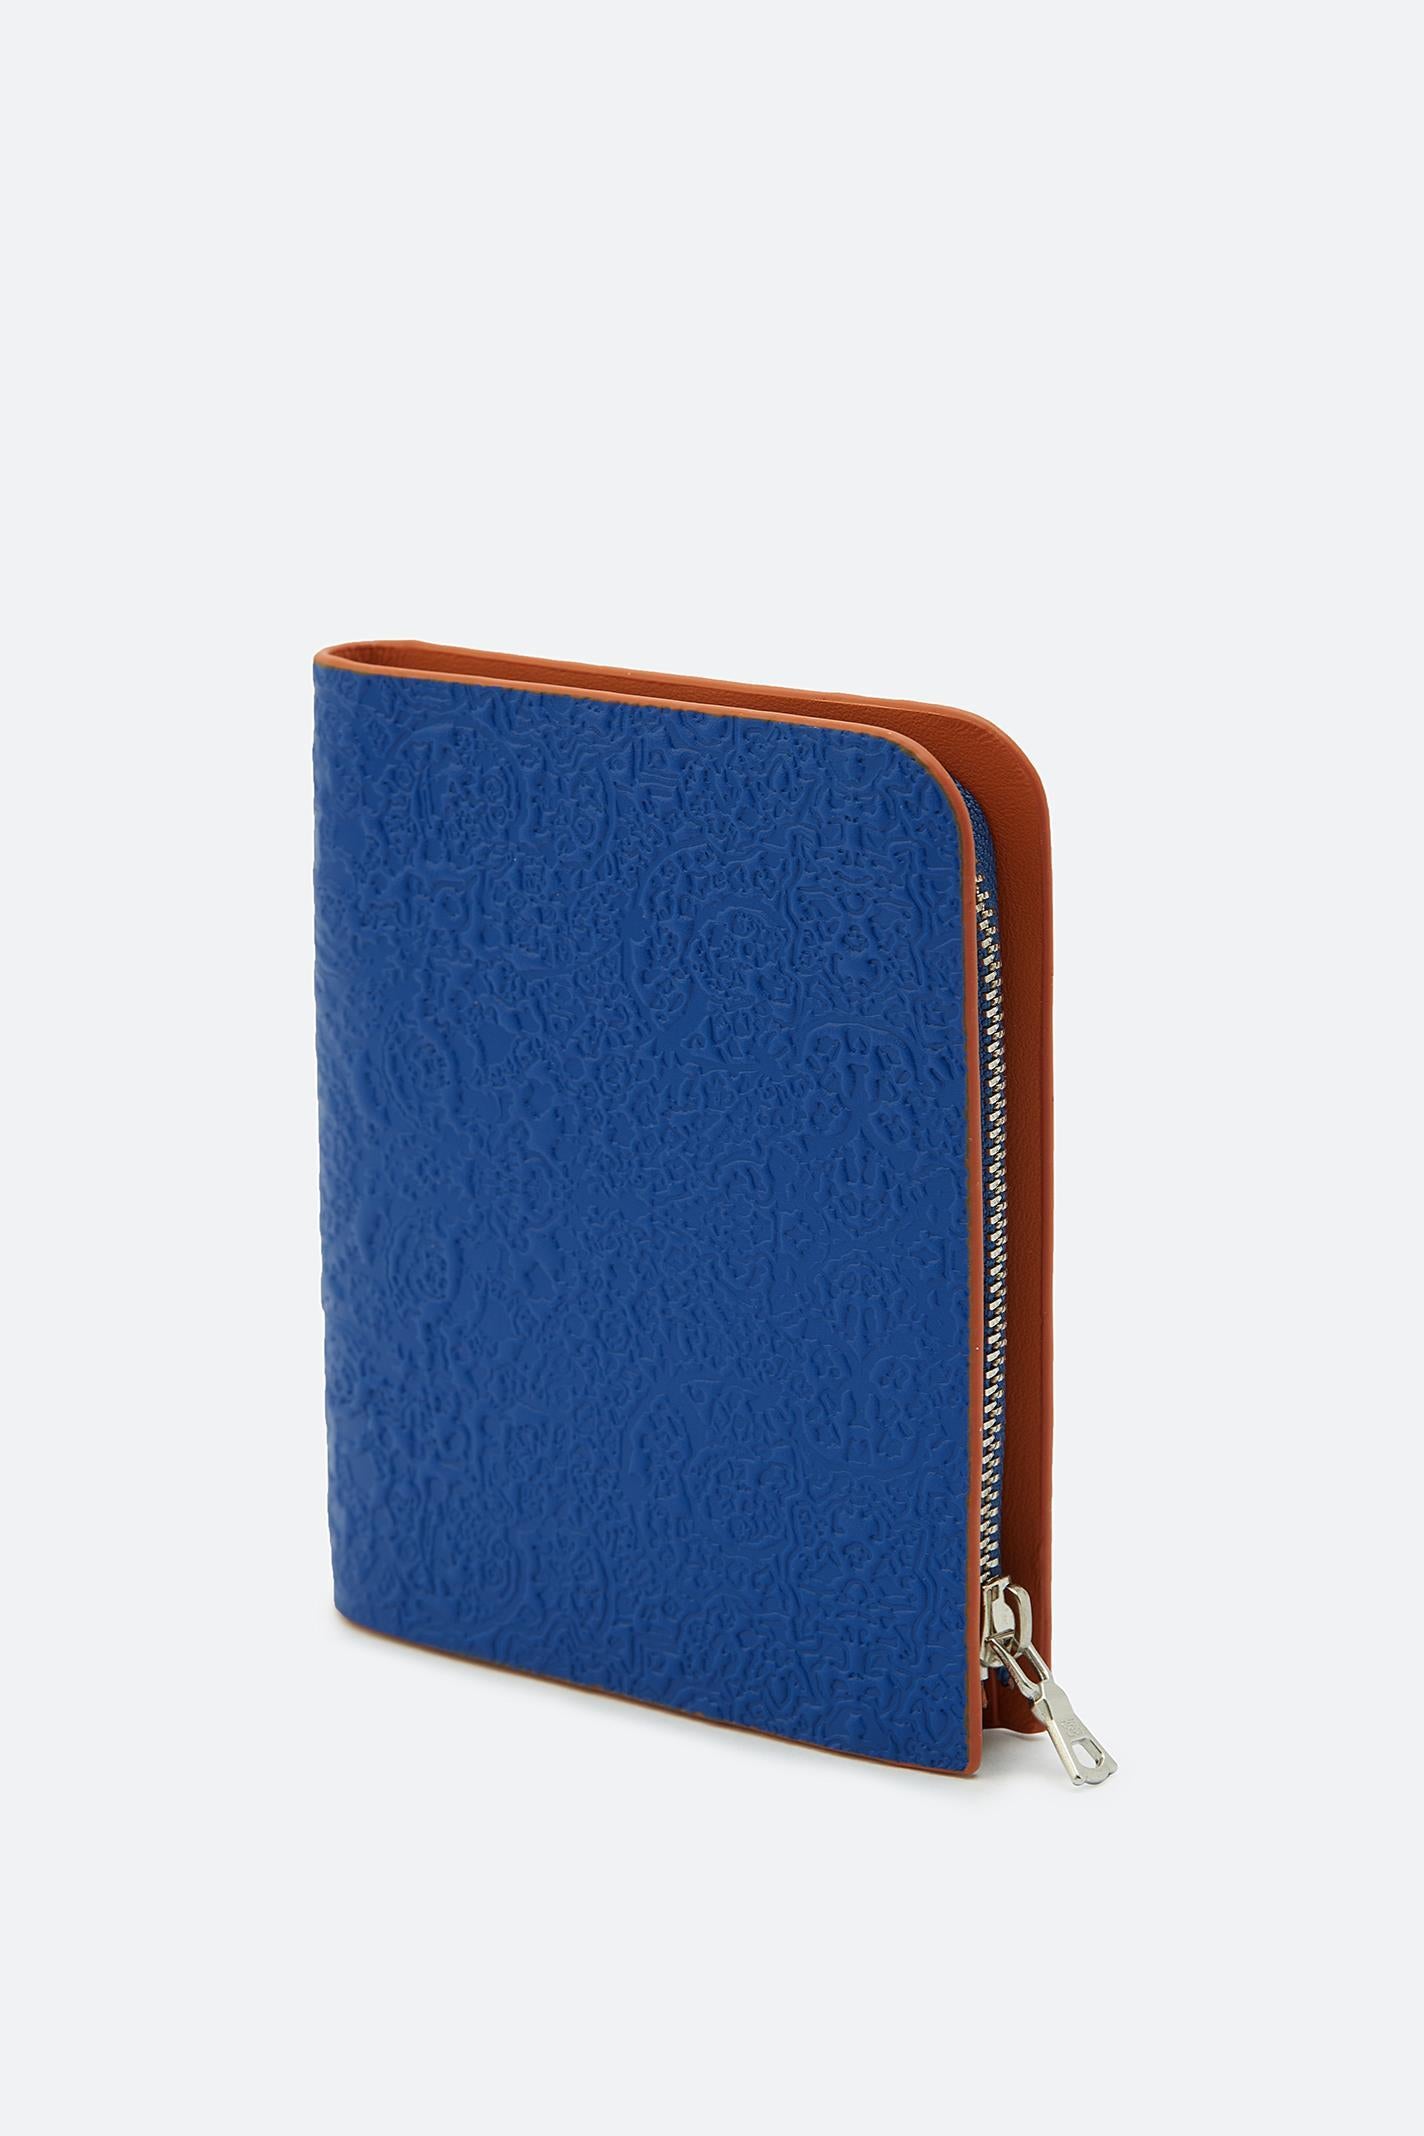 EMBOSSED LARGE ZIPPED WALLET 068 